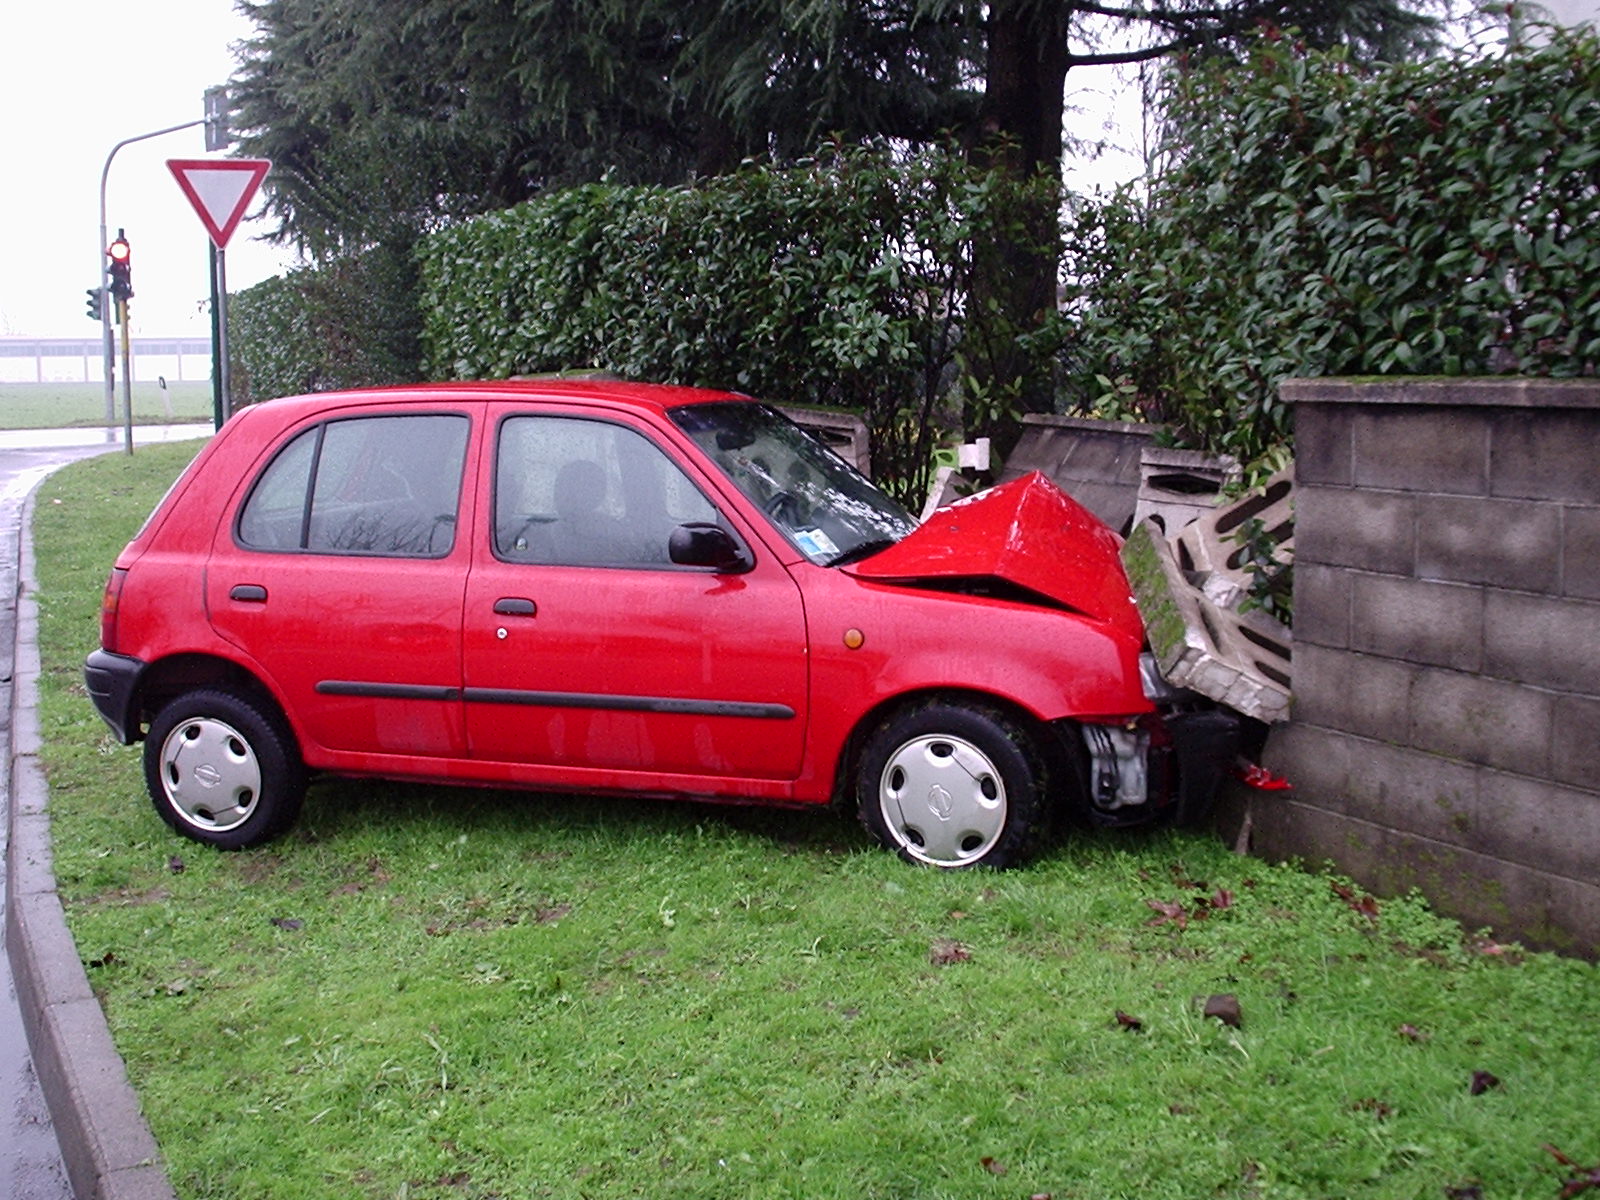 a red car is sitting on its side near a concrete block